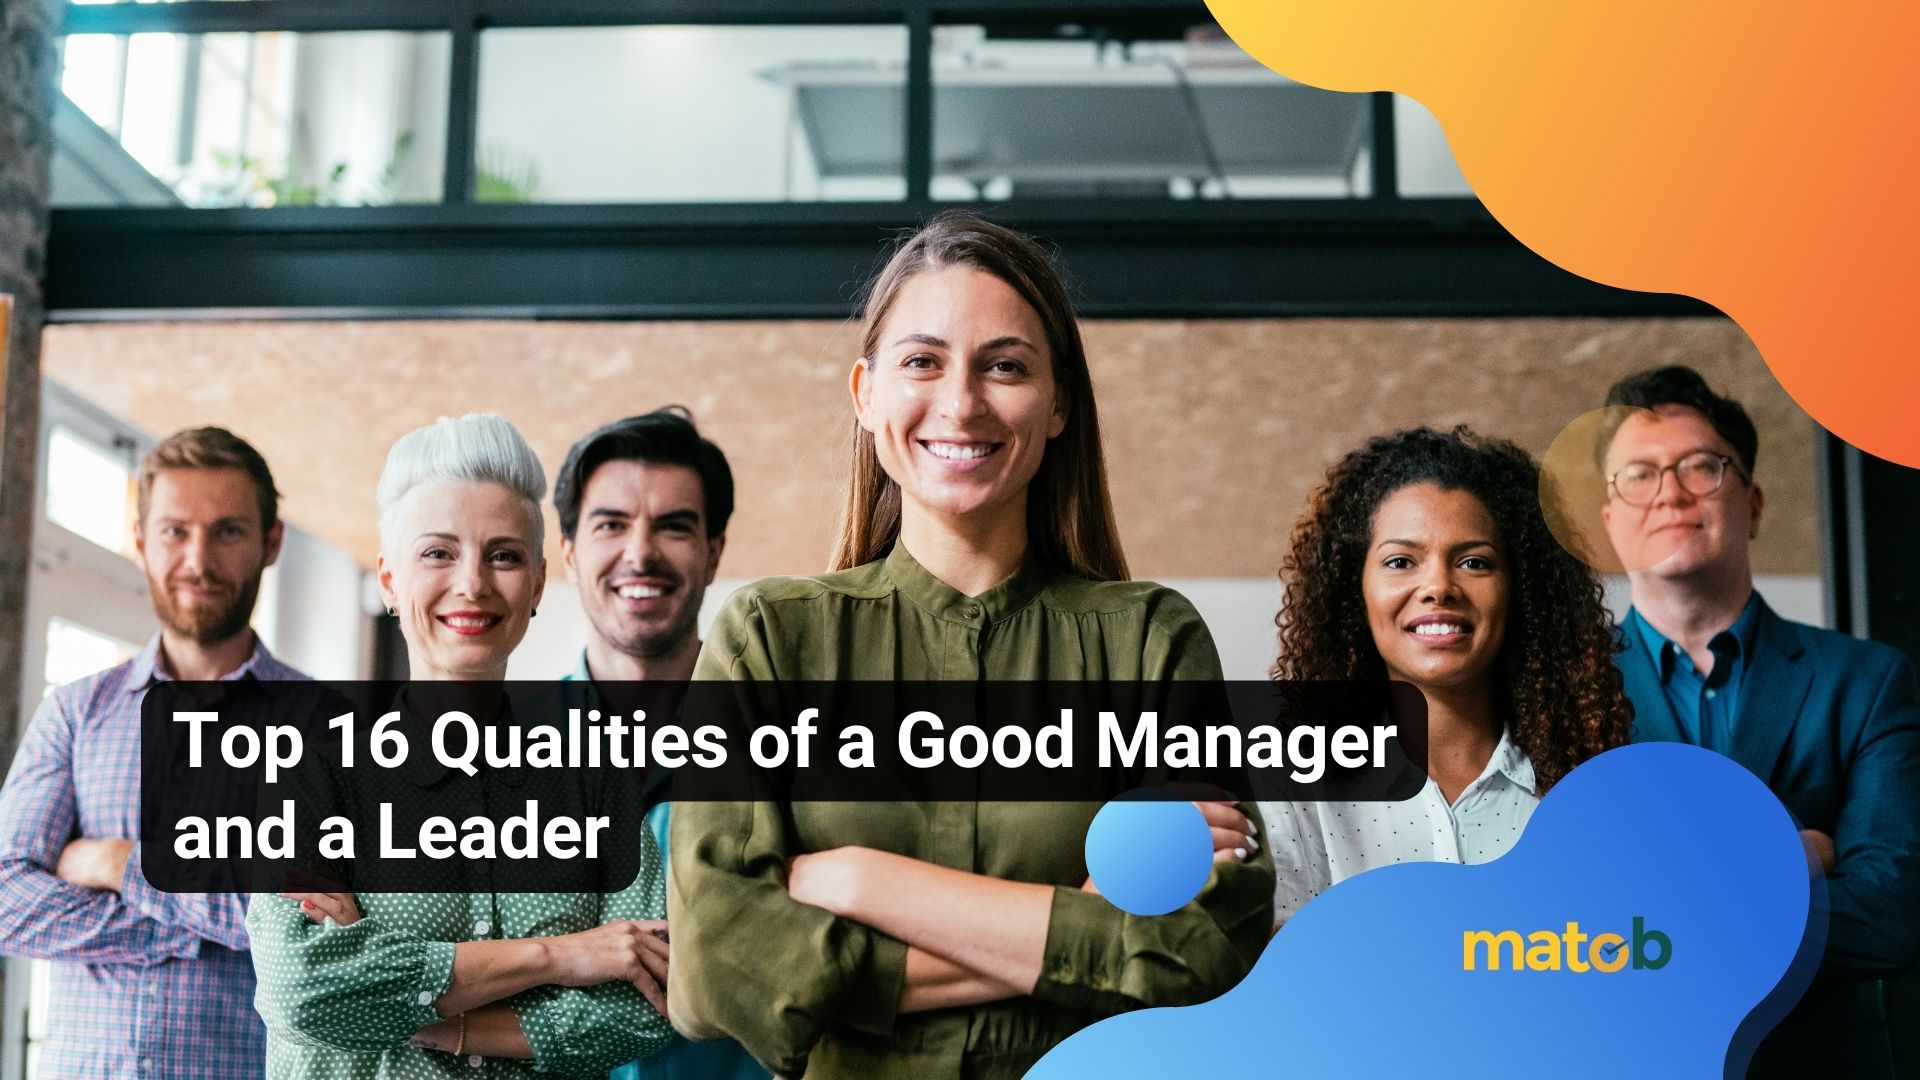 Top 16 Qualities of a Good Manager and a Leader